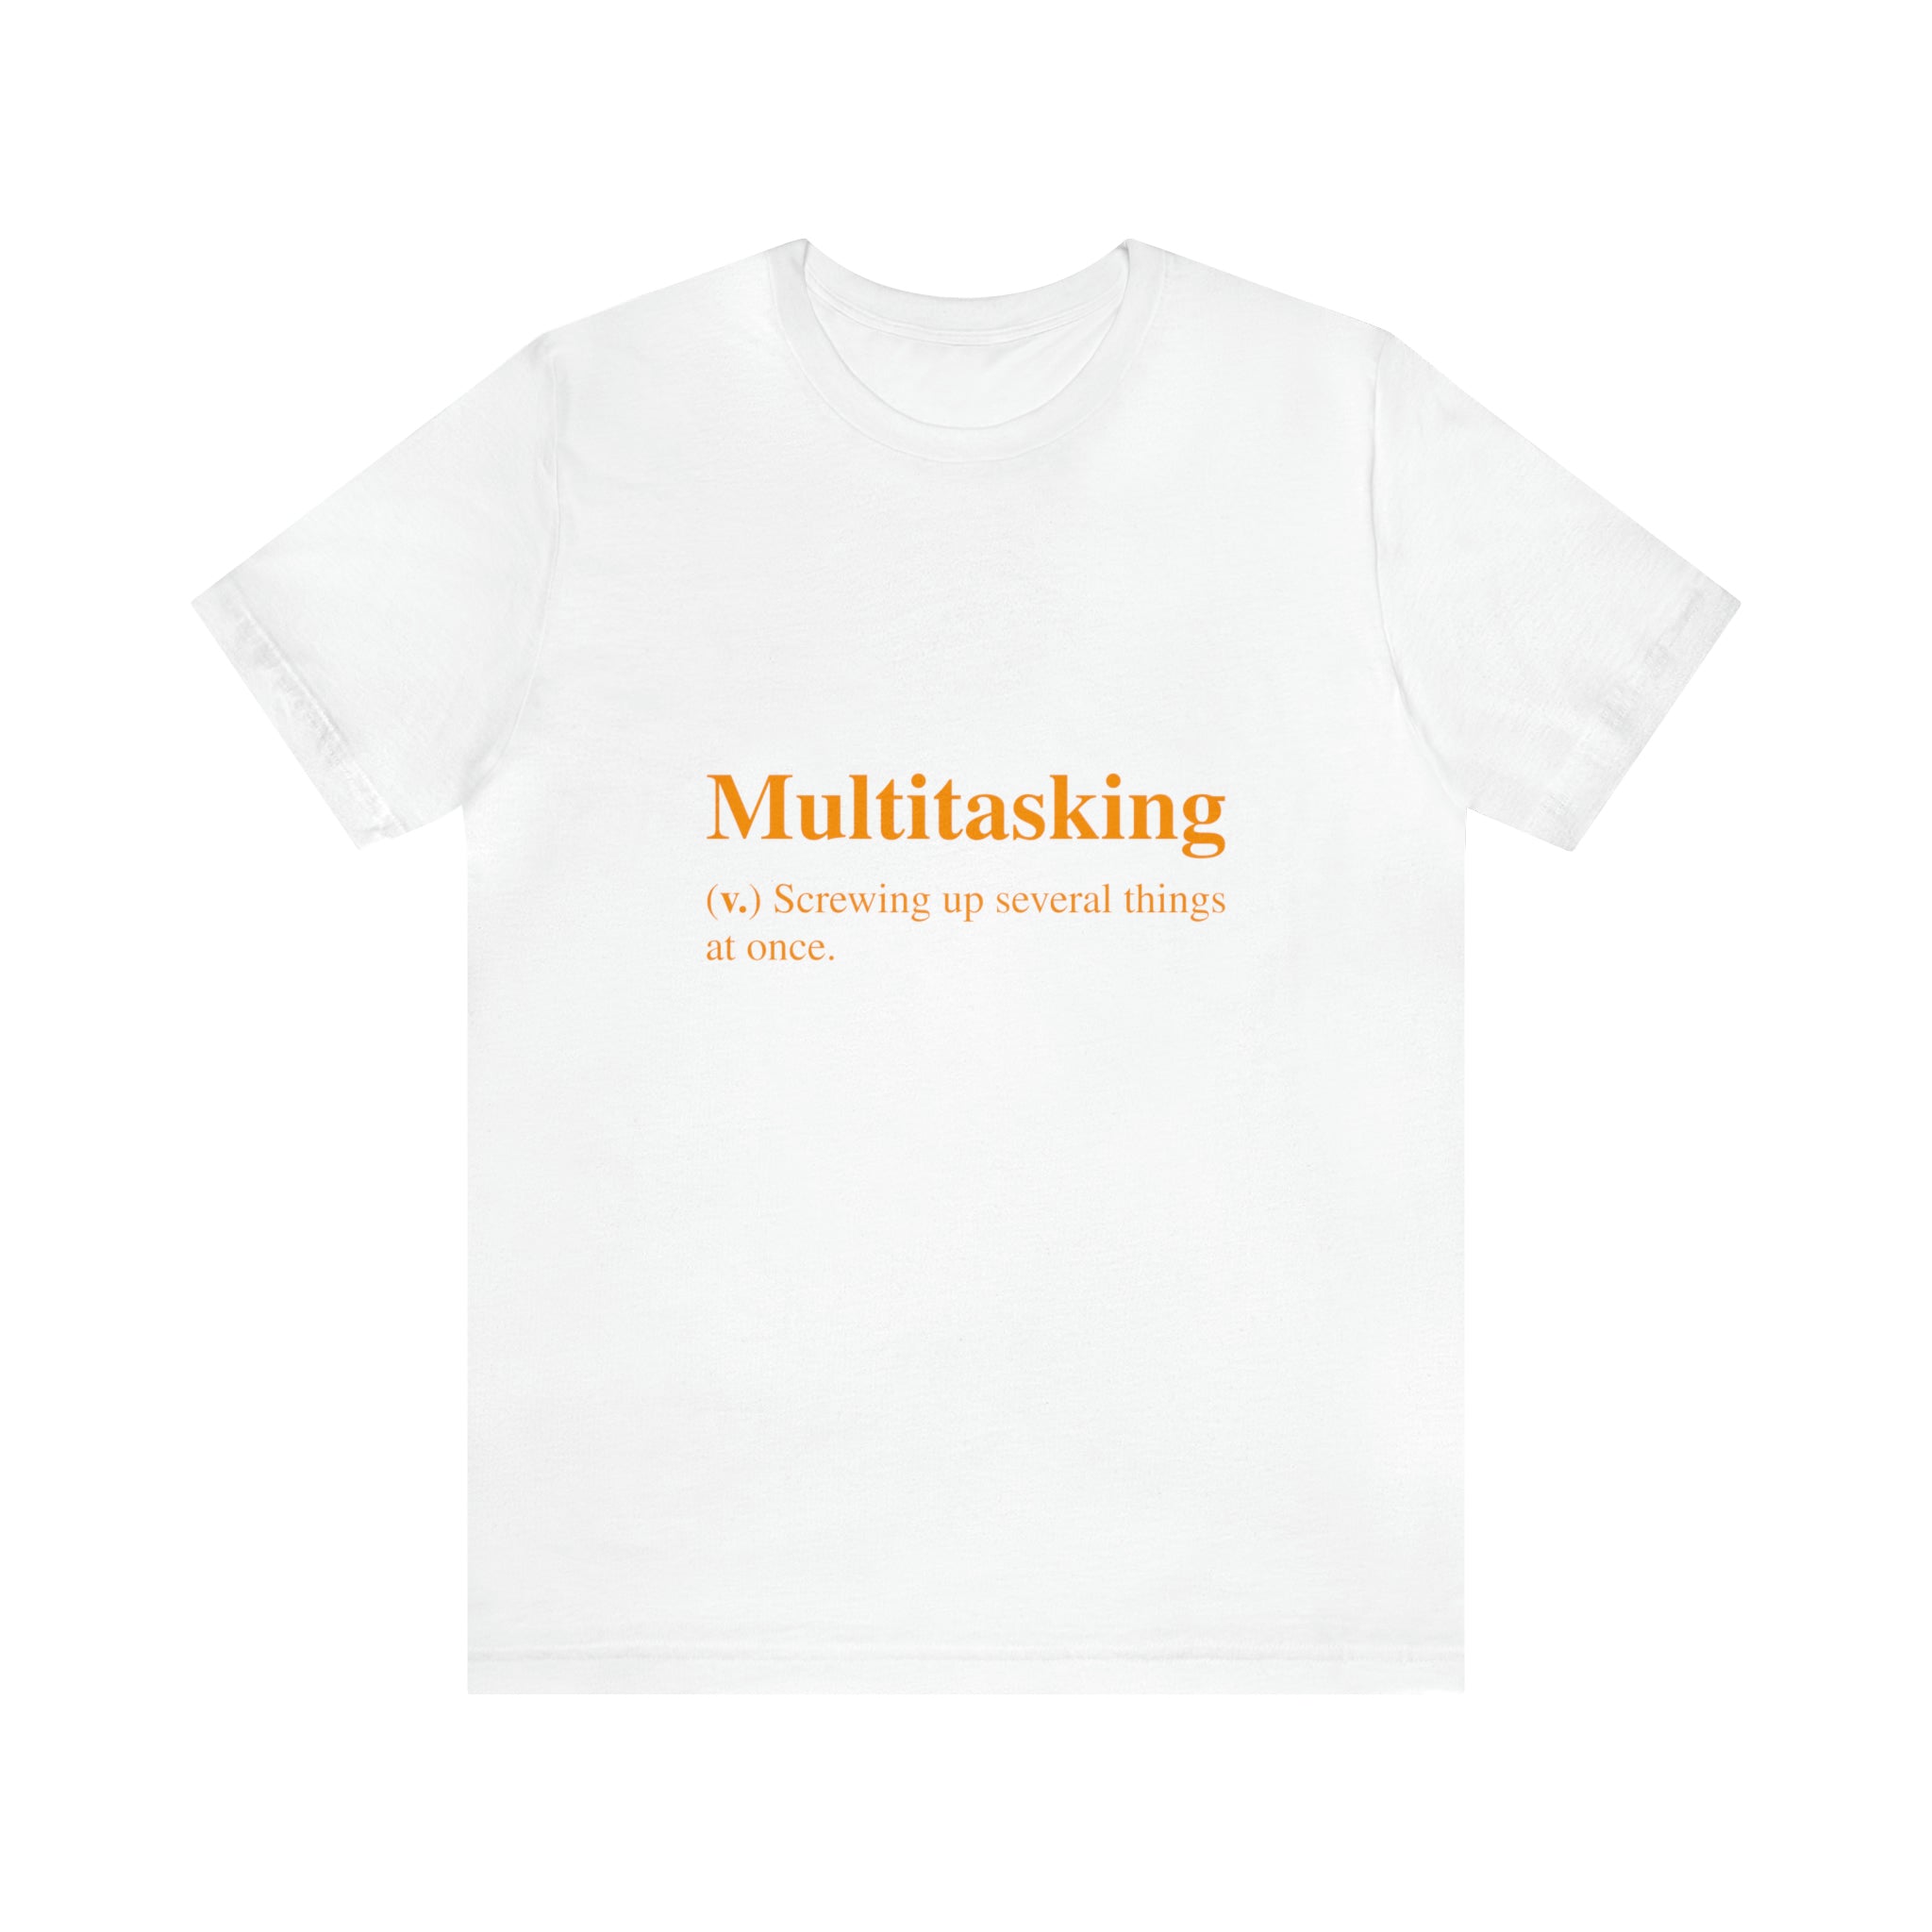 A fashionable Multitasking T-Shirt with the word multitasking.